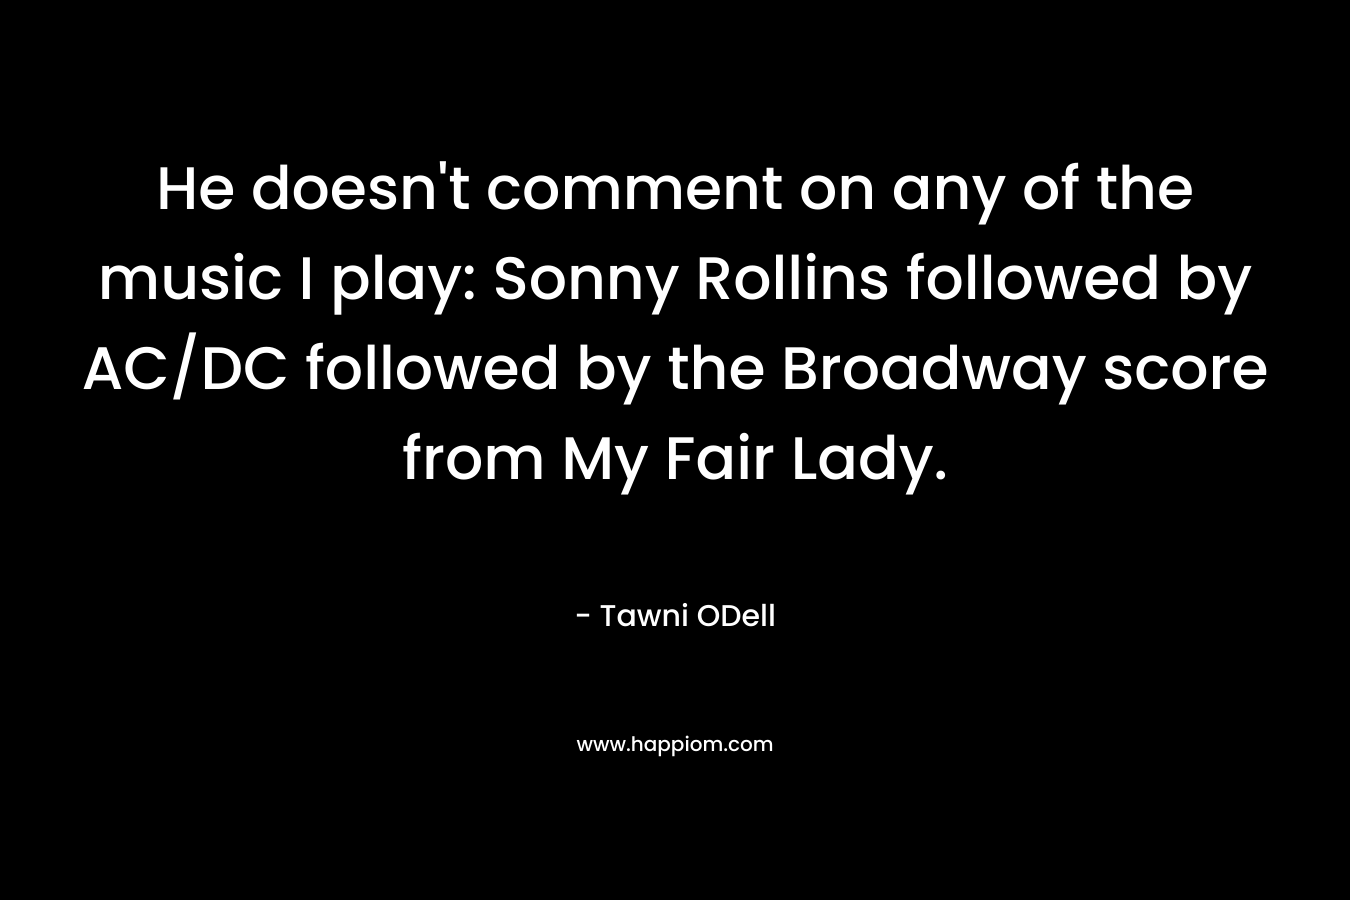 He doesn’t comment on any of the music I play: Sonny Rollins followed by AC/DC followed by the Broadway score from My Fair Lady. – Tawni ODell